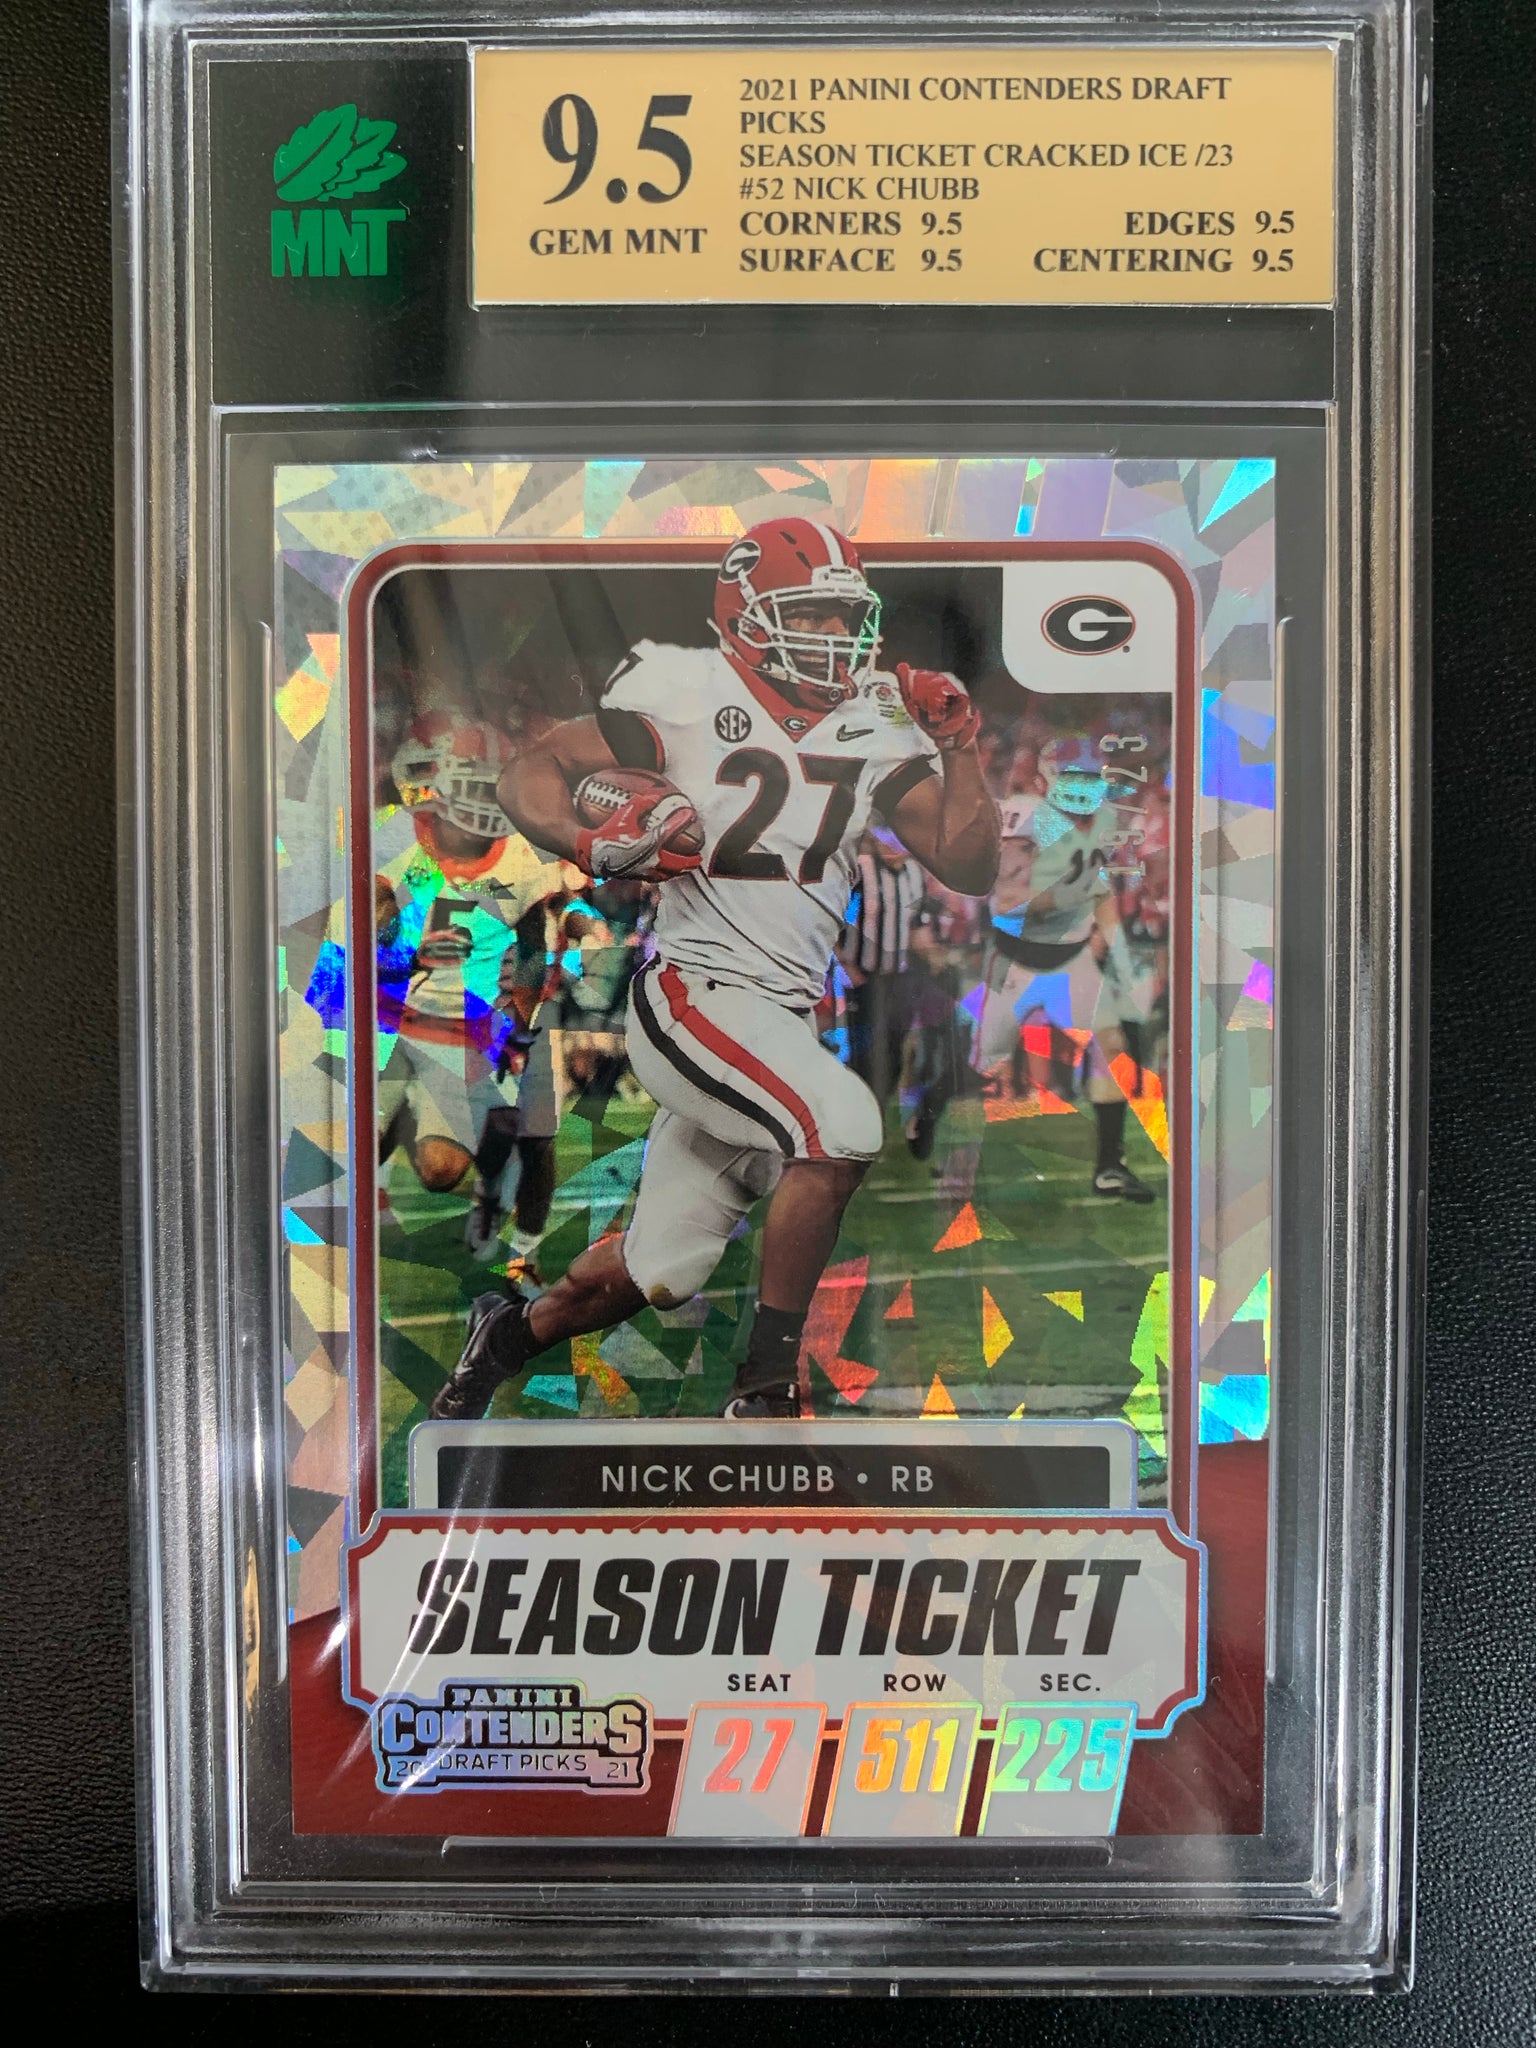 2021 PANINI CONTENDERS DRAFT PICKS FOOTBALL #52 CLEVELAND BROWNS - NICK CHUBB CRACKED ICE SEASON TICKET NUMBERED 19/23 GRADED MNT 9.5 GEM MINT